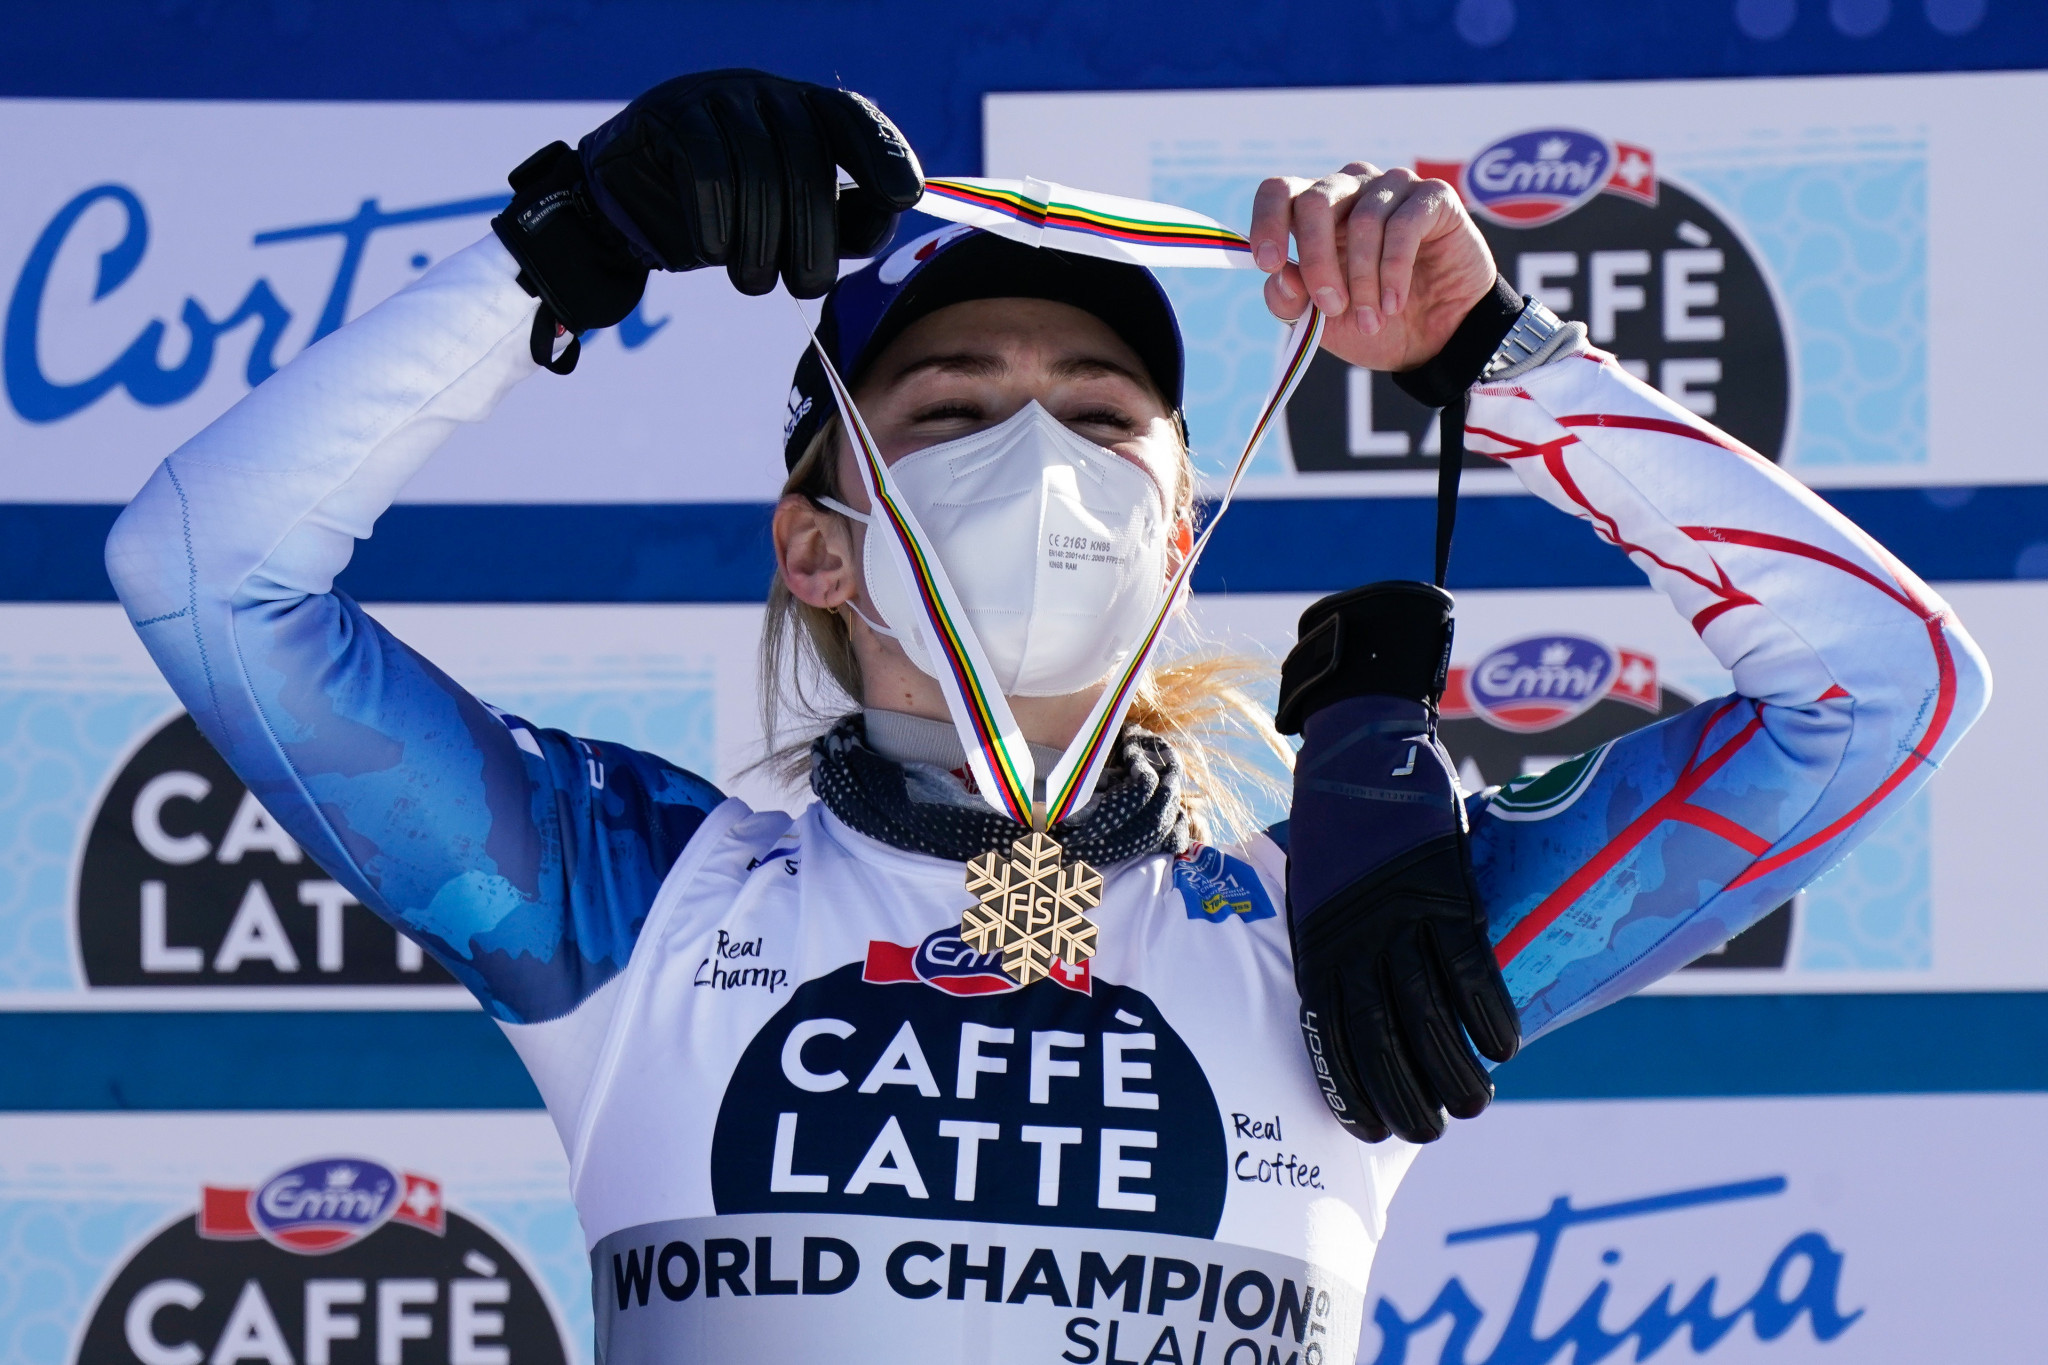 Mikaela Shiffrin earned her fourth medal of the Alpine Ski World Championships in the women's slalom ©Getty Images